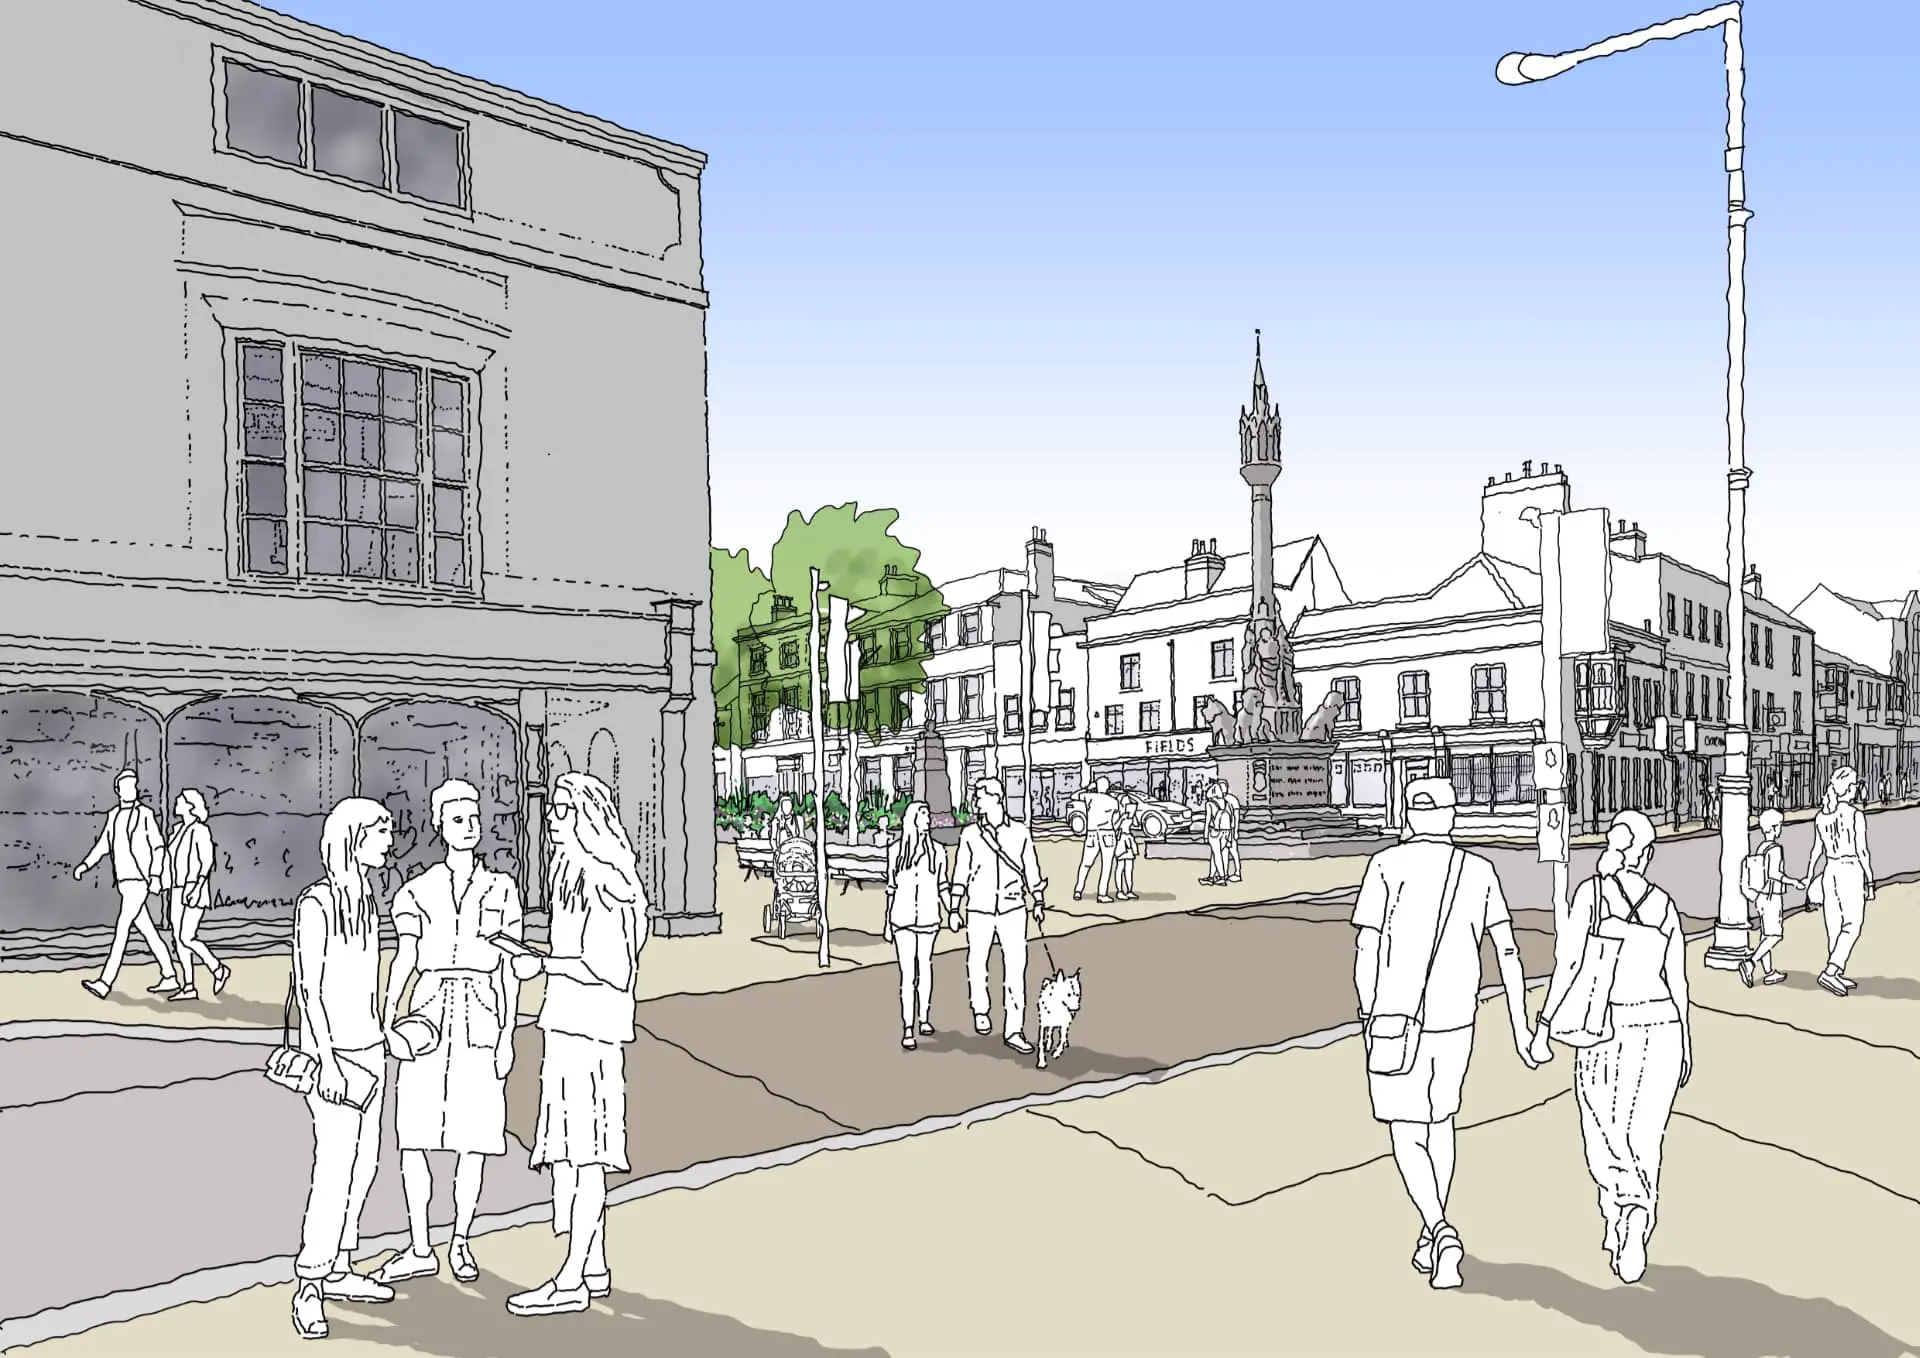 Artist's impression of Junction of High Street and St James Street